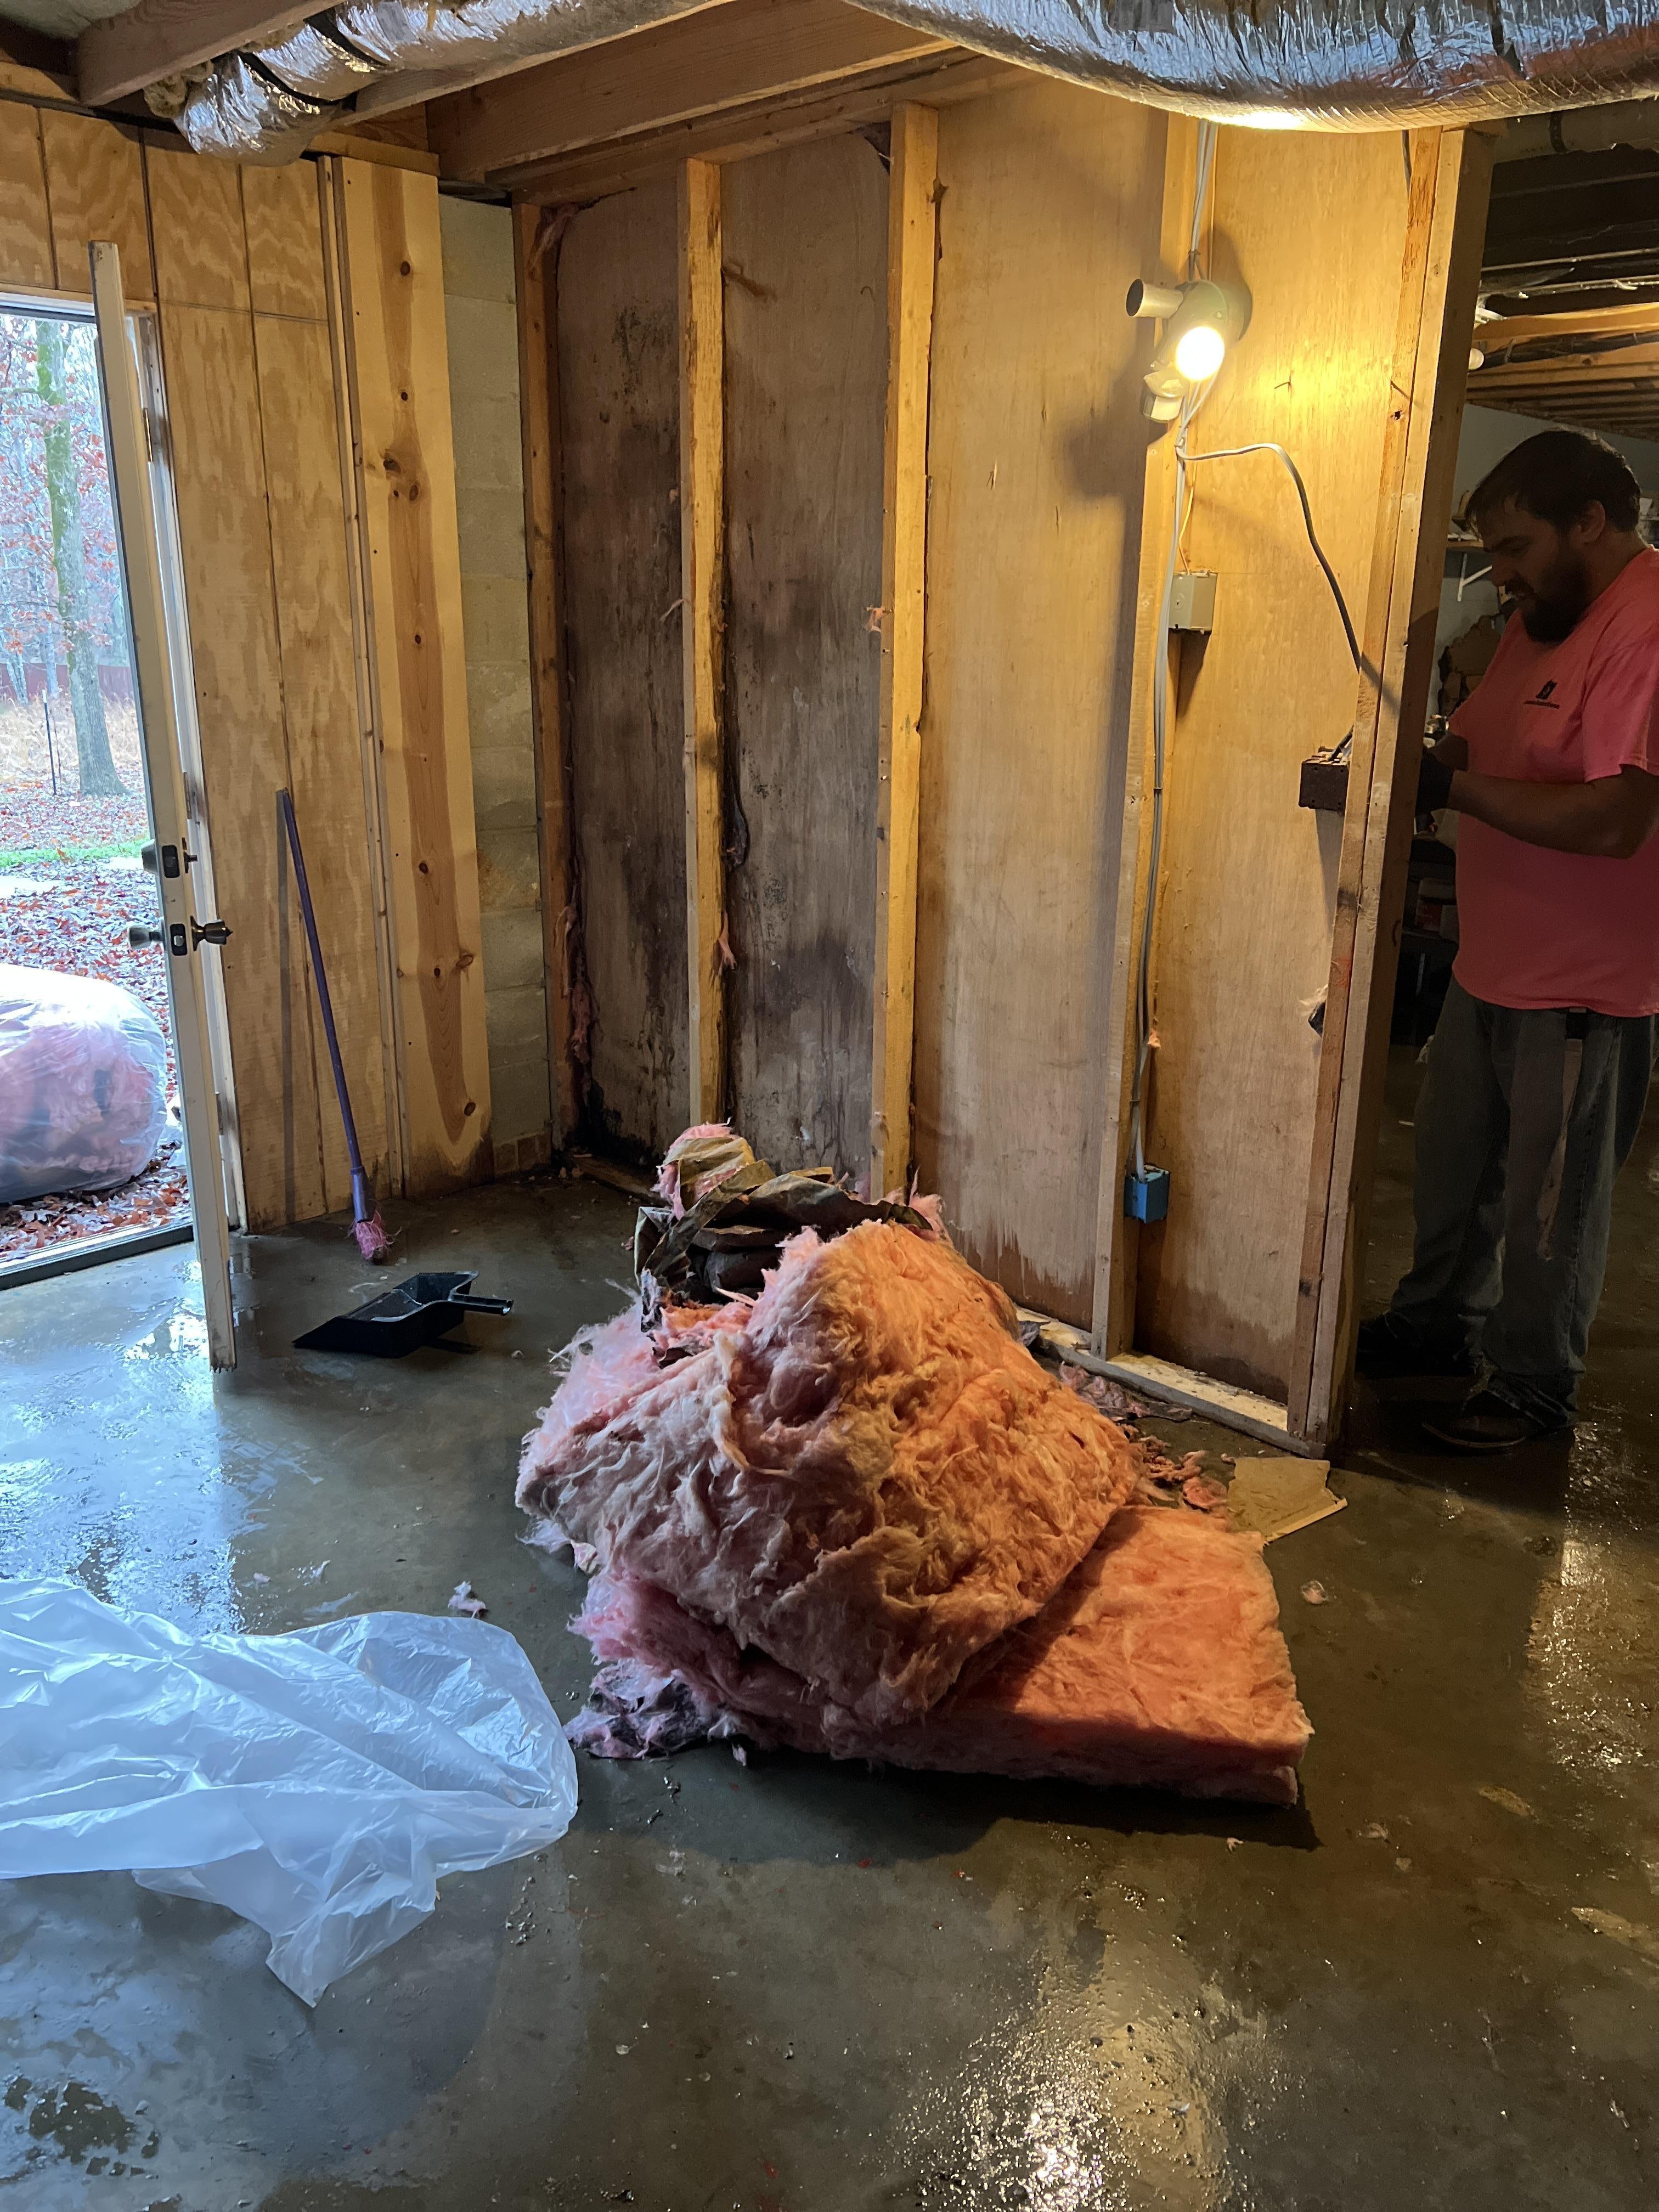 Wet insulation from water damage